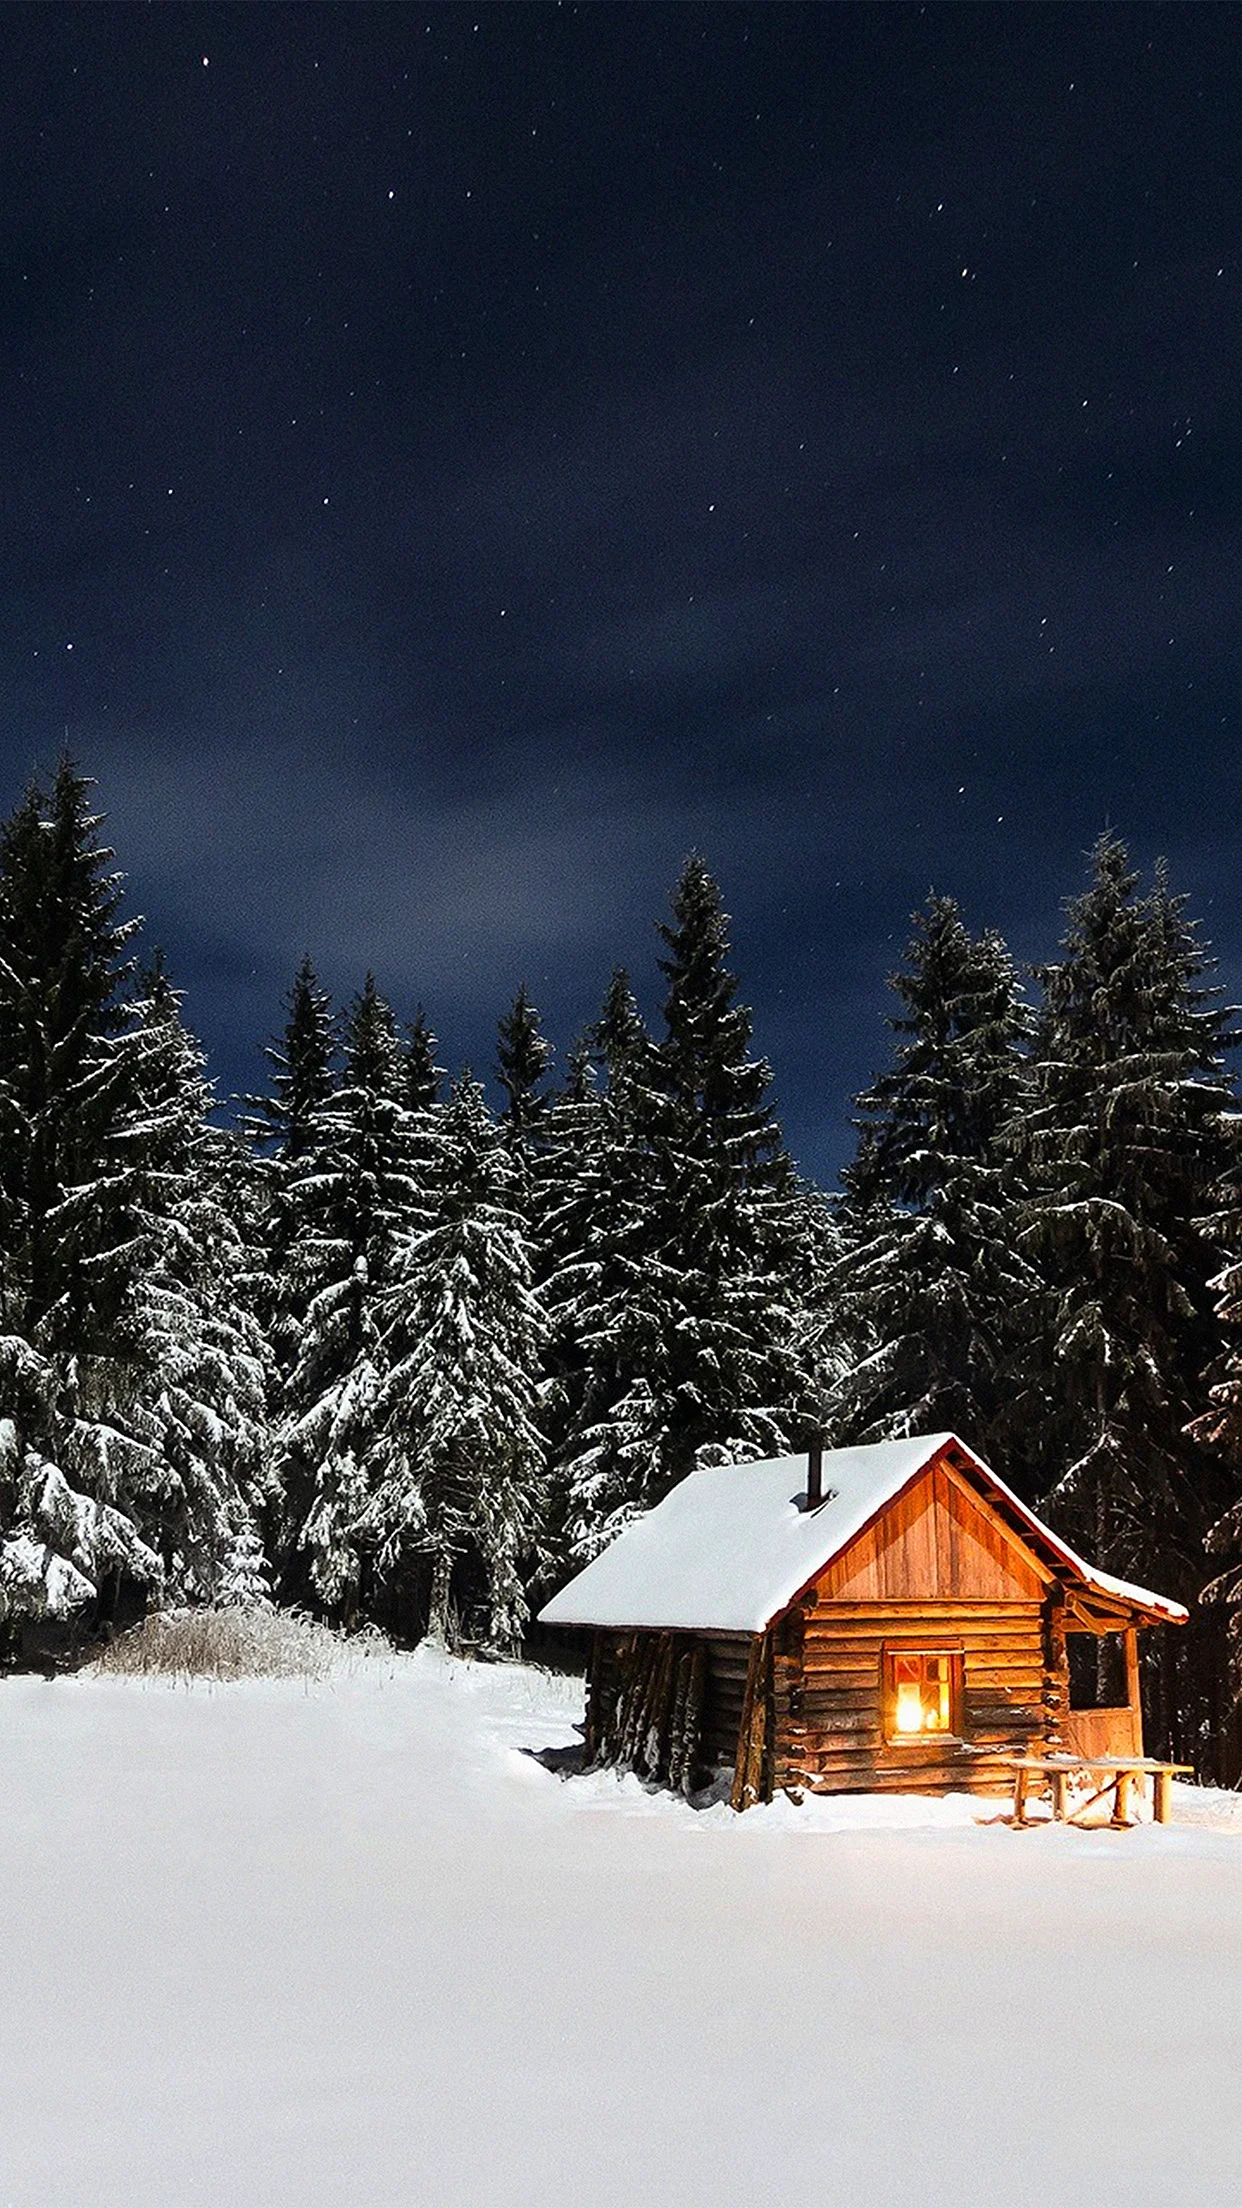 Winter House Wallpaper For iPhone